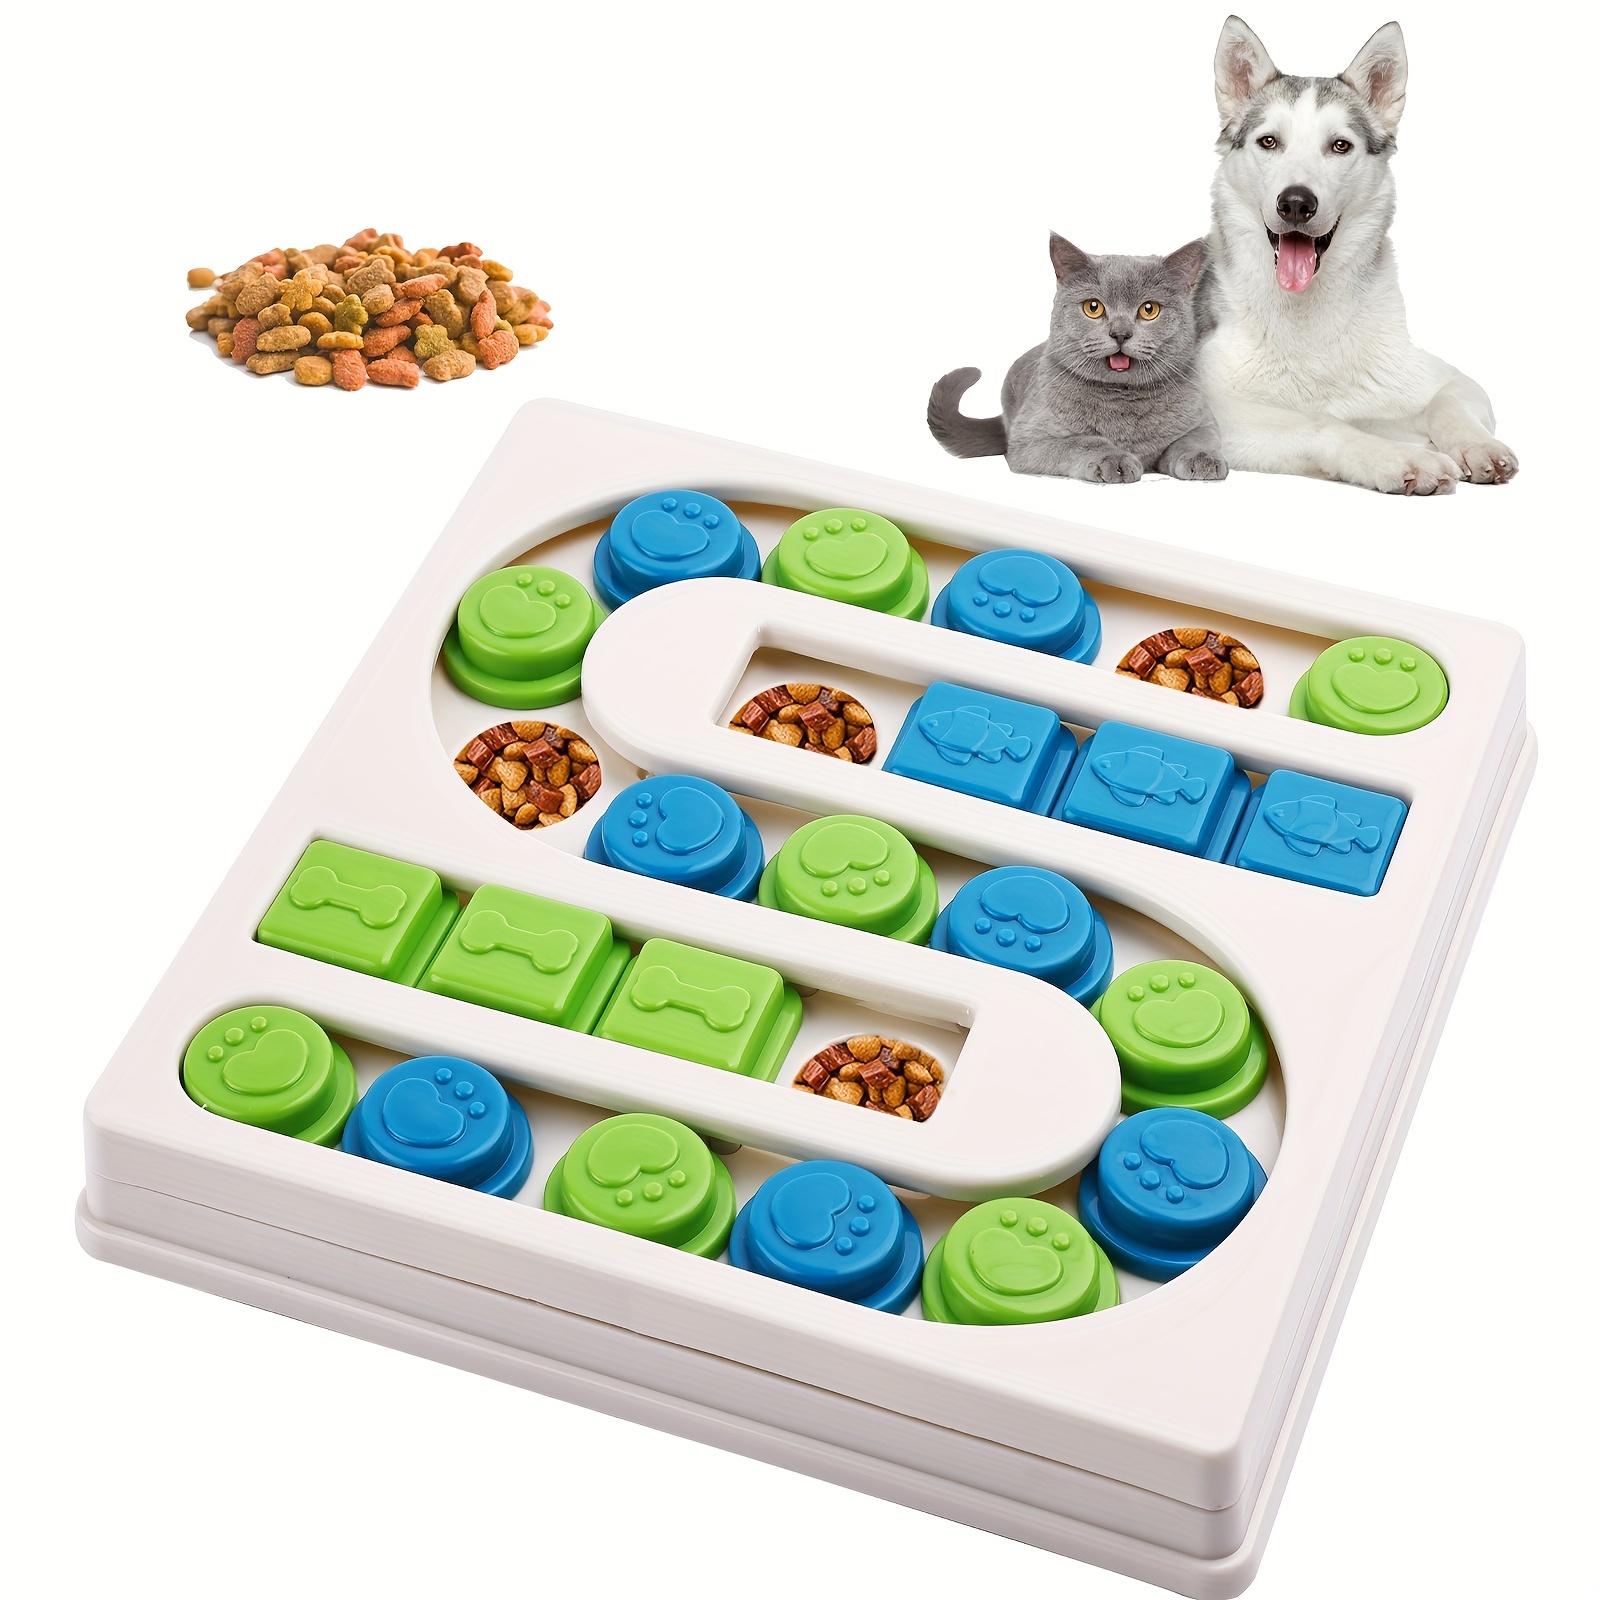 Sparkfire sparkfire interactive dog & cat treat puzzle toy - slow  dispensing food - promotes smart brain stimulation and healthy eating